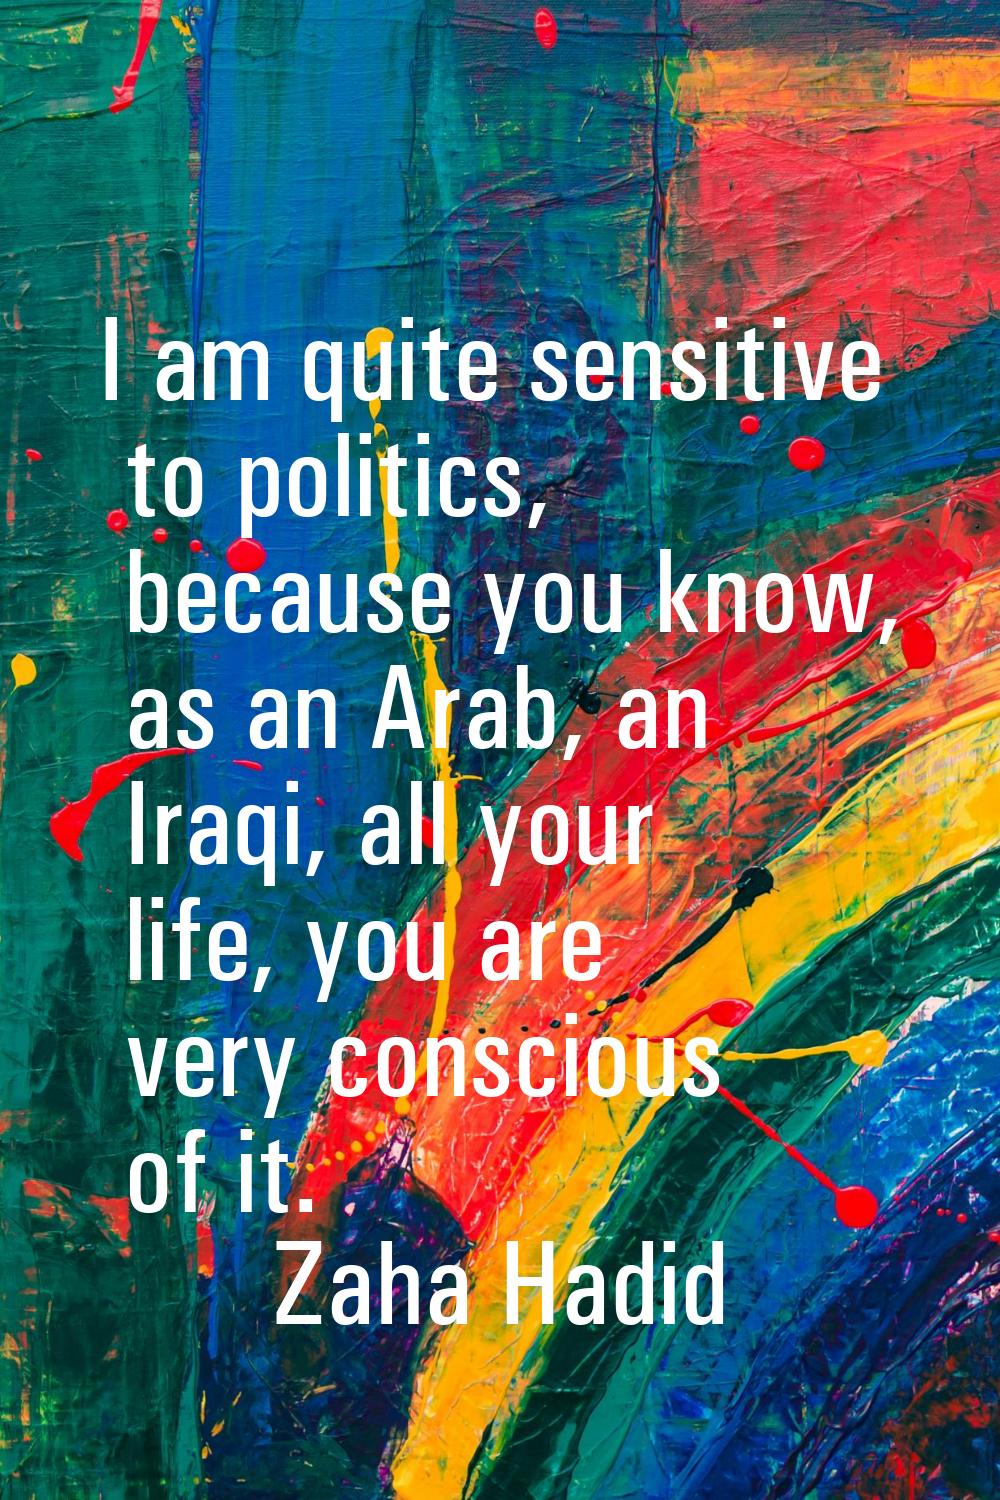 I am quite sensitive to politics, because you know, as an Arab, an Iraqi, all your life, you are ve